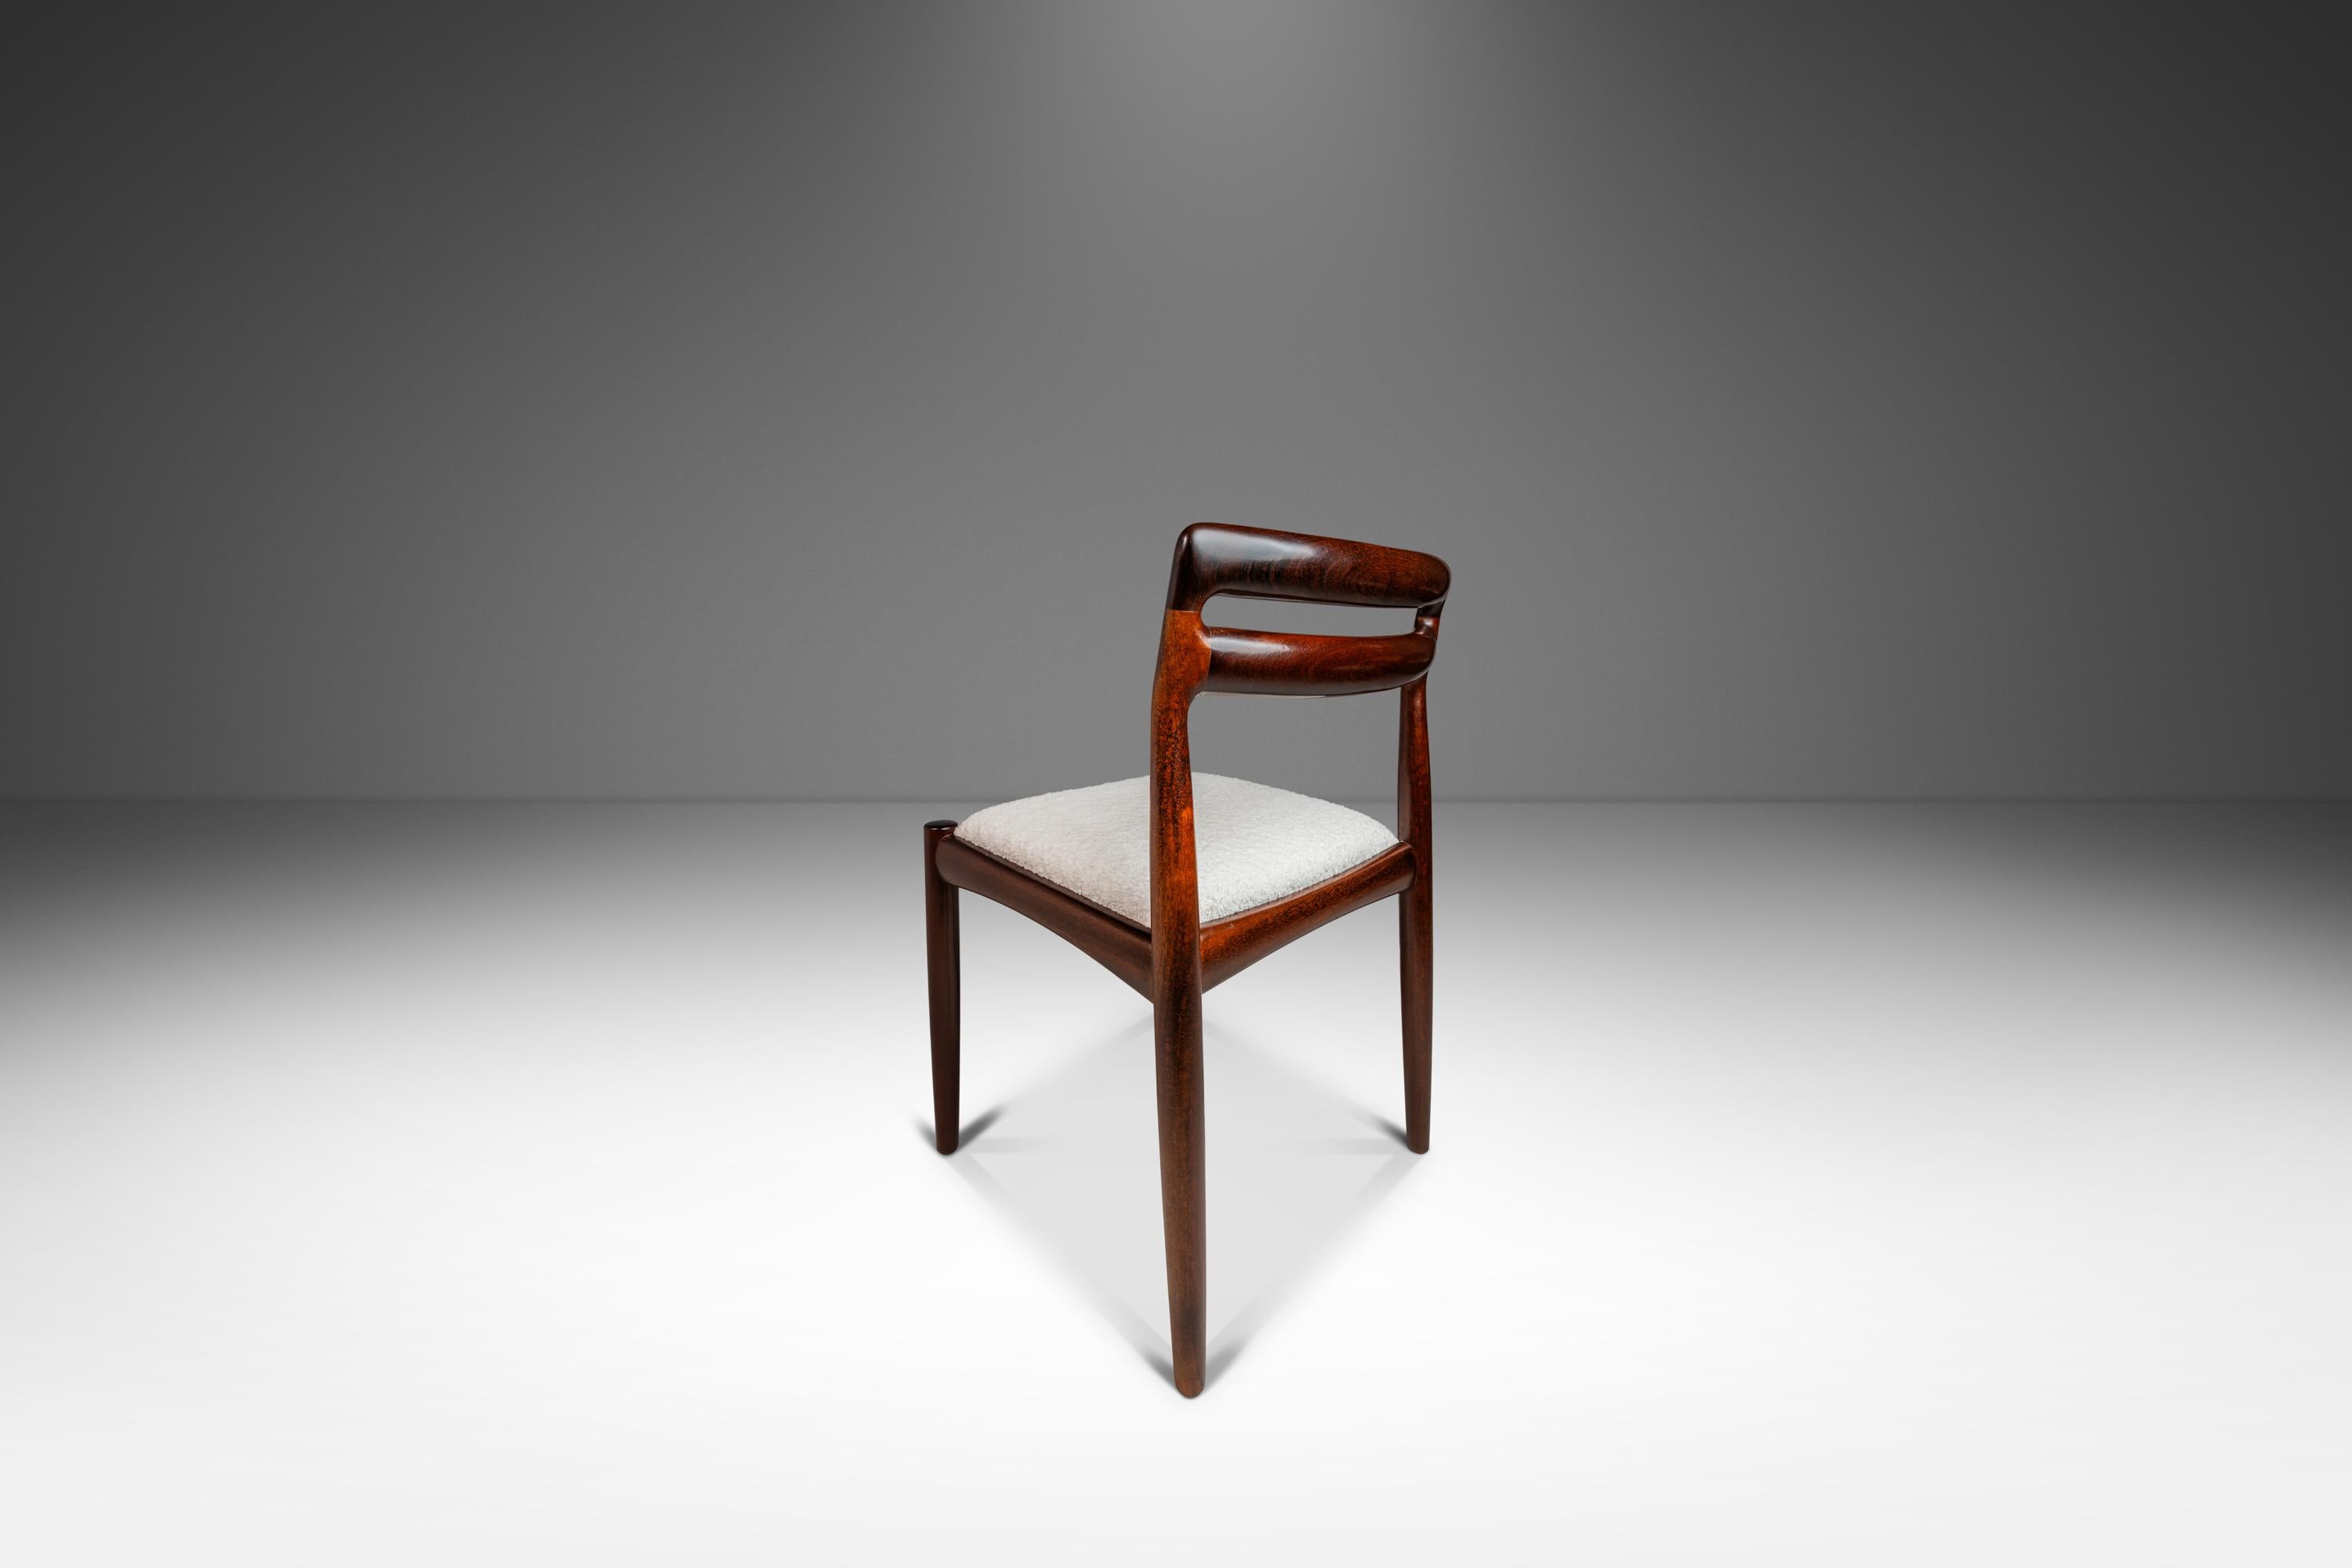 Mid-20th Century Set of 4 Model 382 Dining Chairs in Mahogany by H.W. Klein, Denmark, c. 1960s